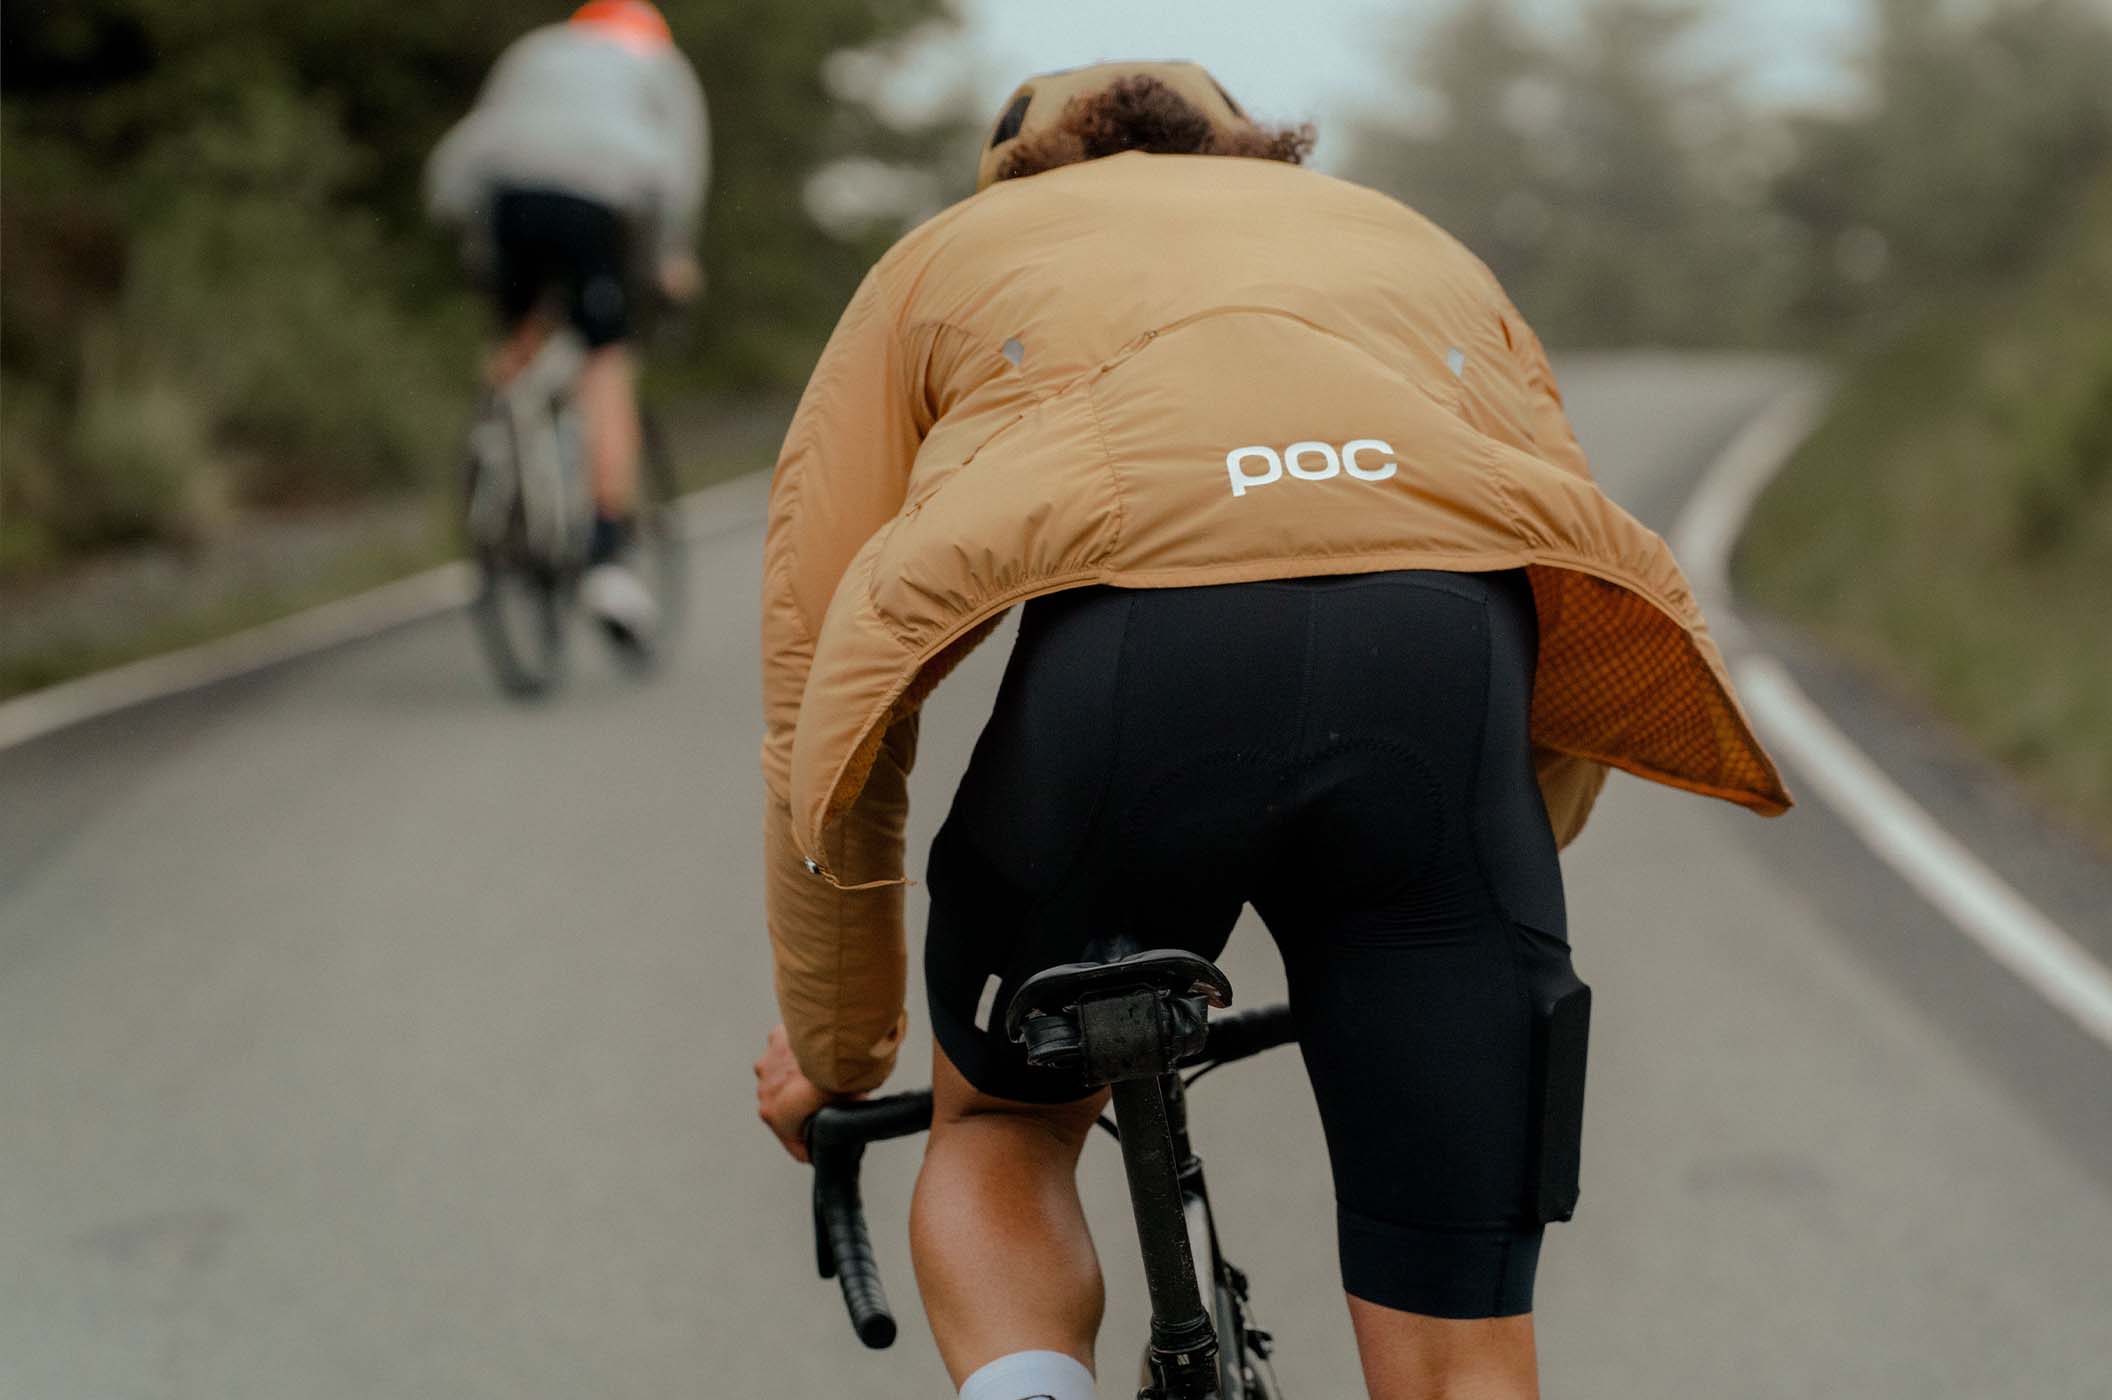 POC Helmets, Glasses & Protection – Safety & Style for MTB & Road